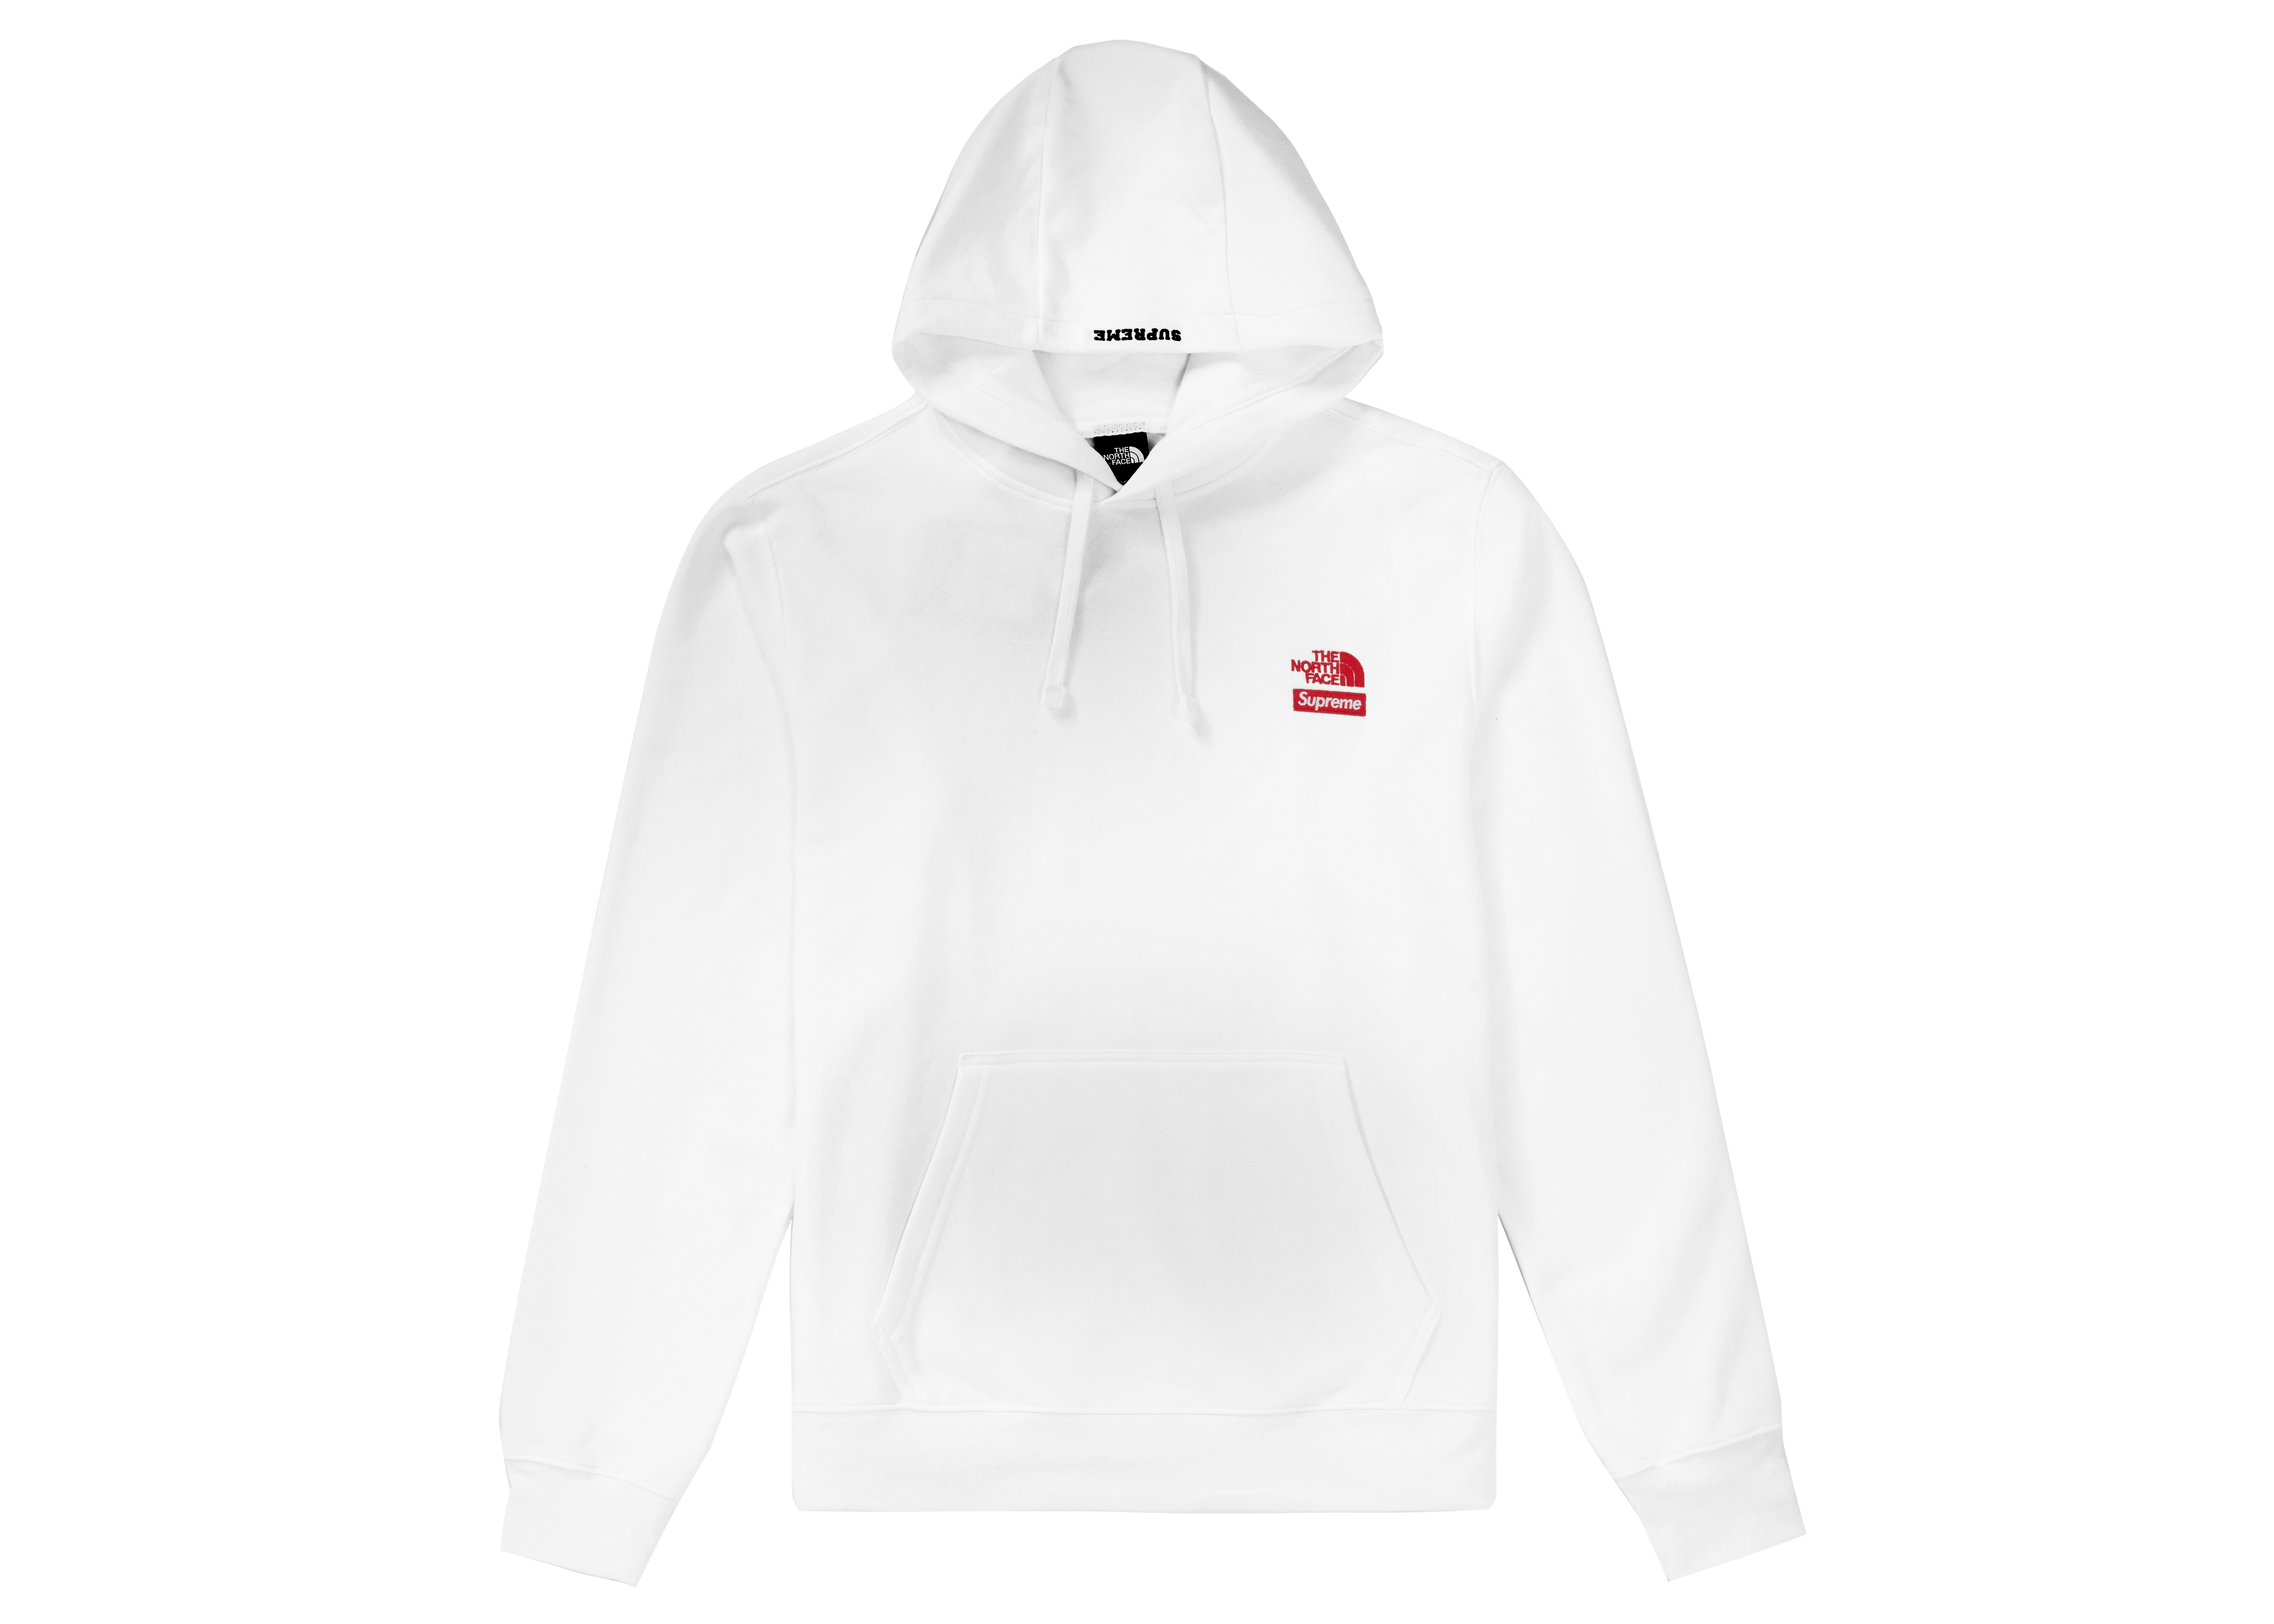 Supreme The North Face Statue of Liberty Hooded Sweatshirt White